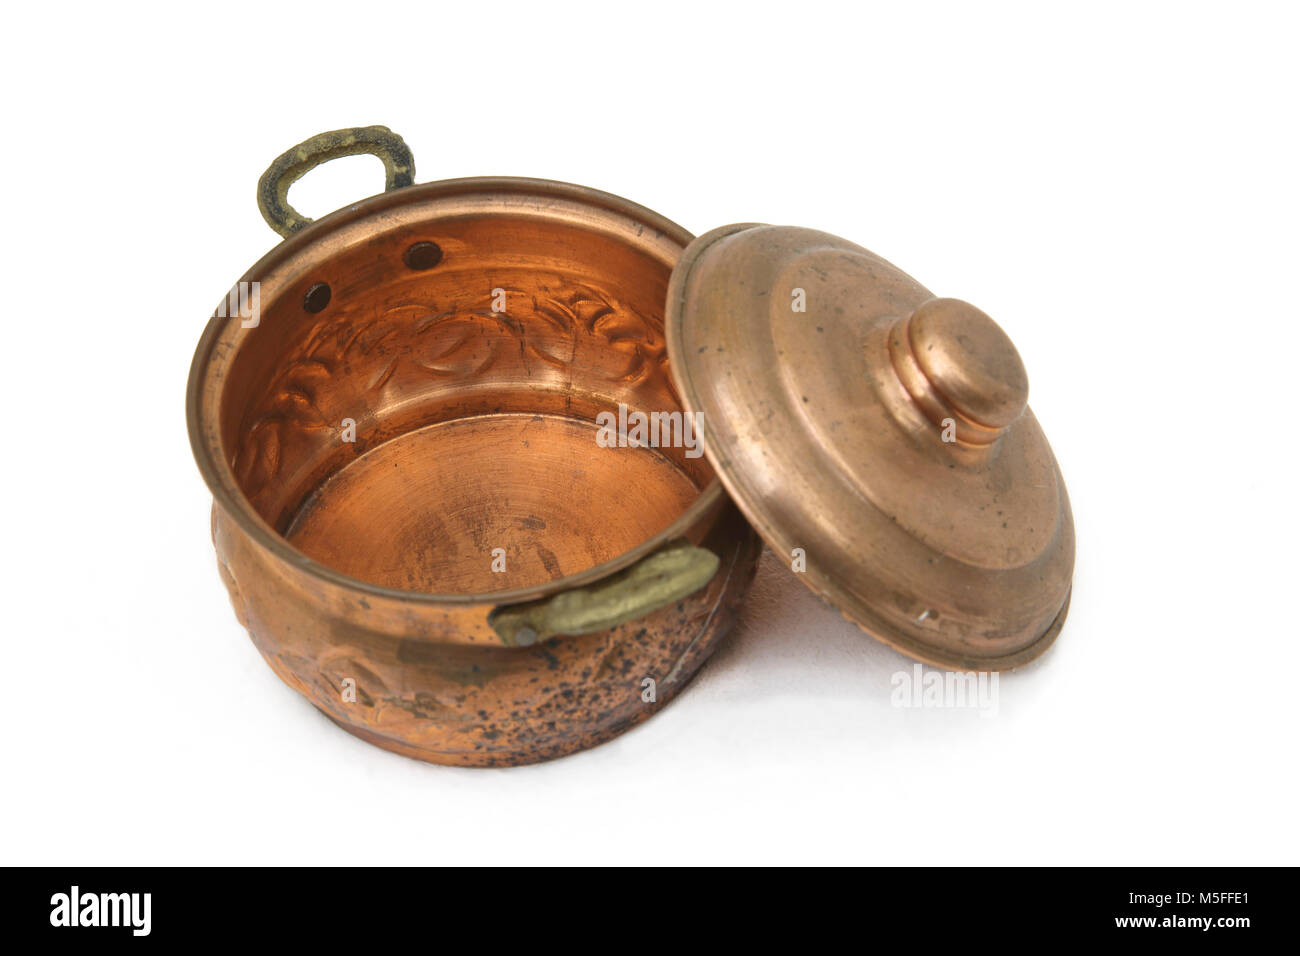 Copper Cooking Pot With Handles Stock Photo